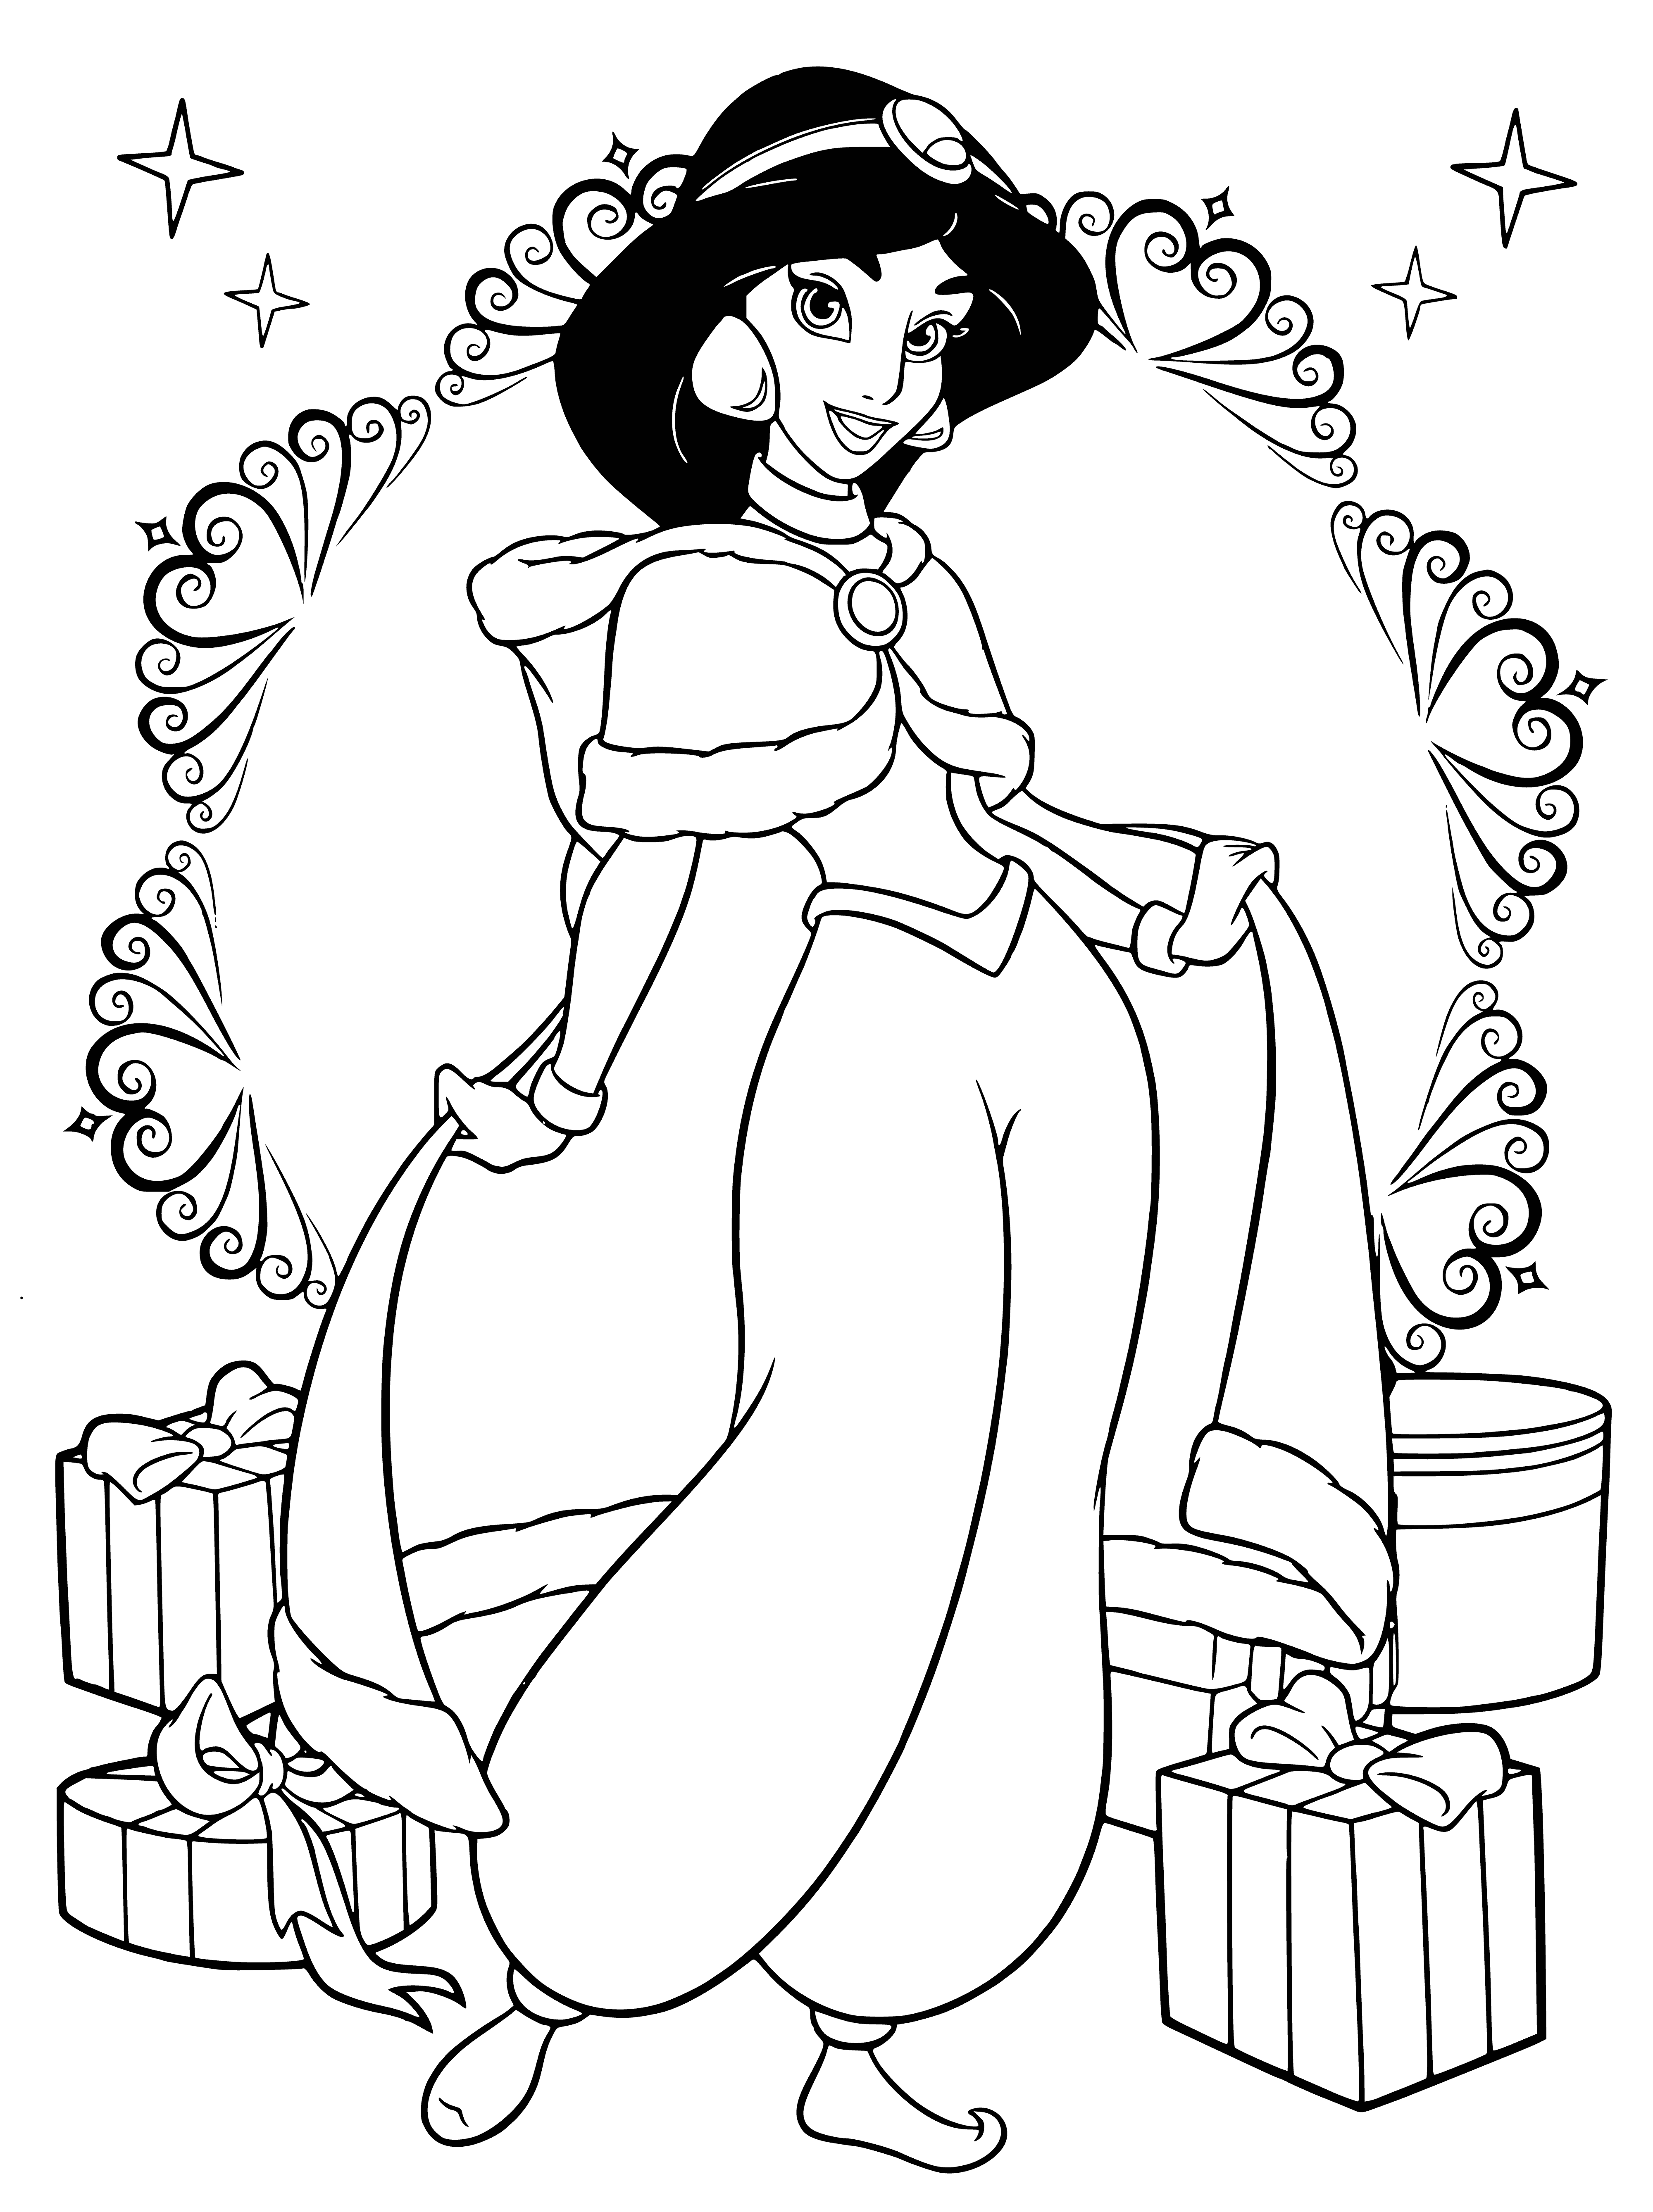 coloring page: Disney princesses, Jasmine and presents under the tree; she grins, holding a gift and card, toasting the New Year!